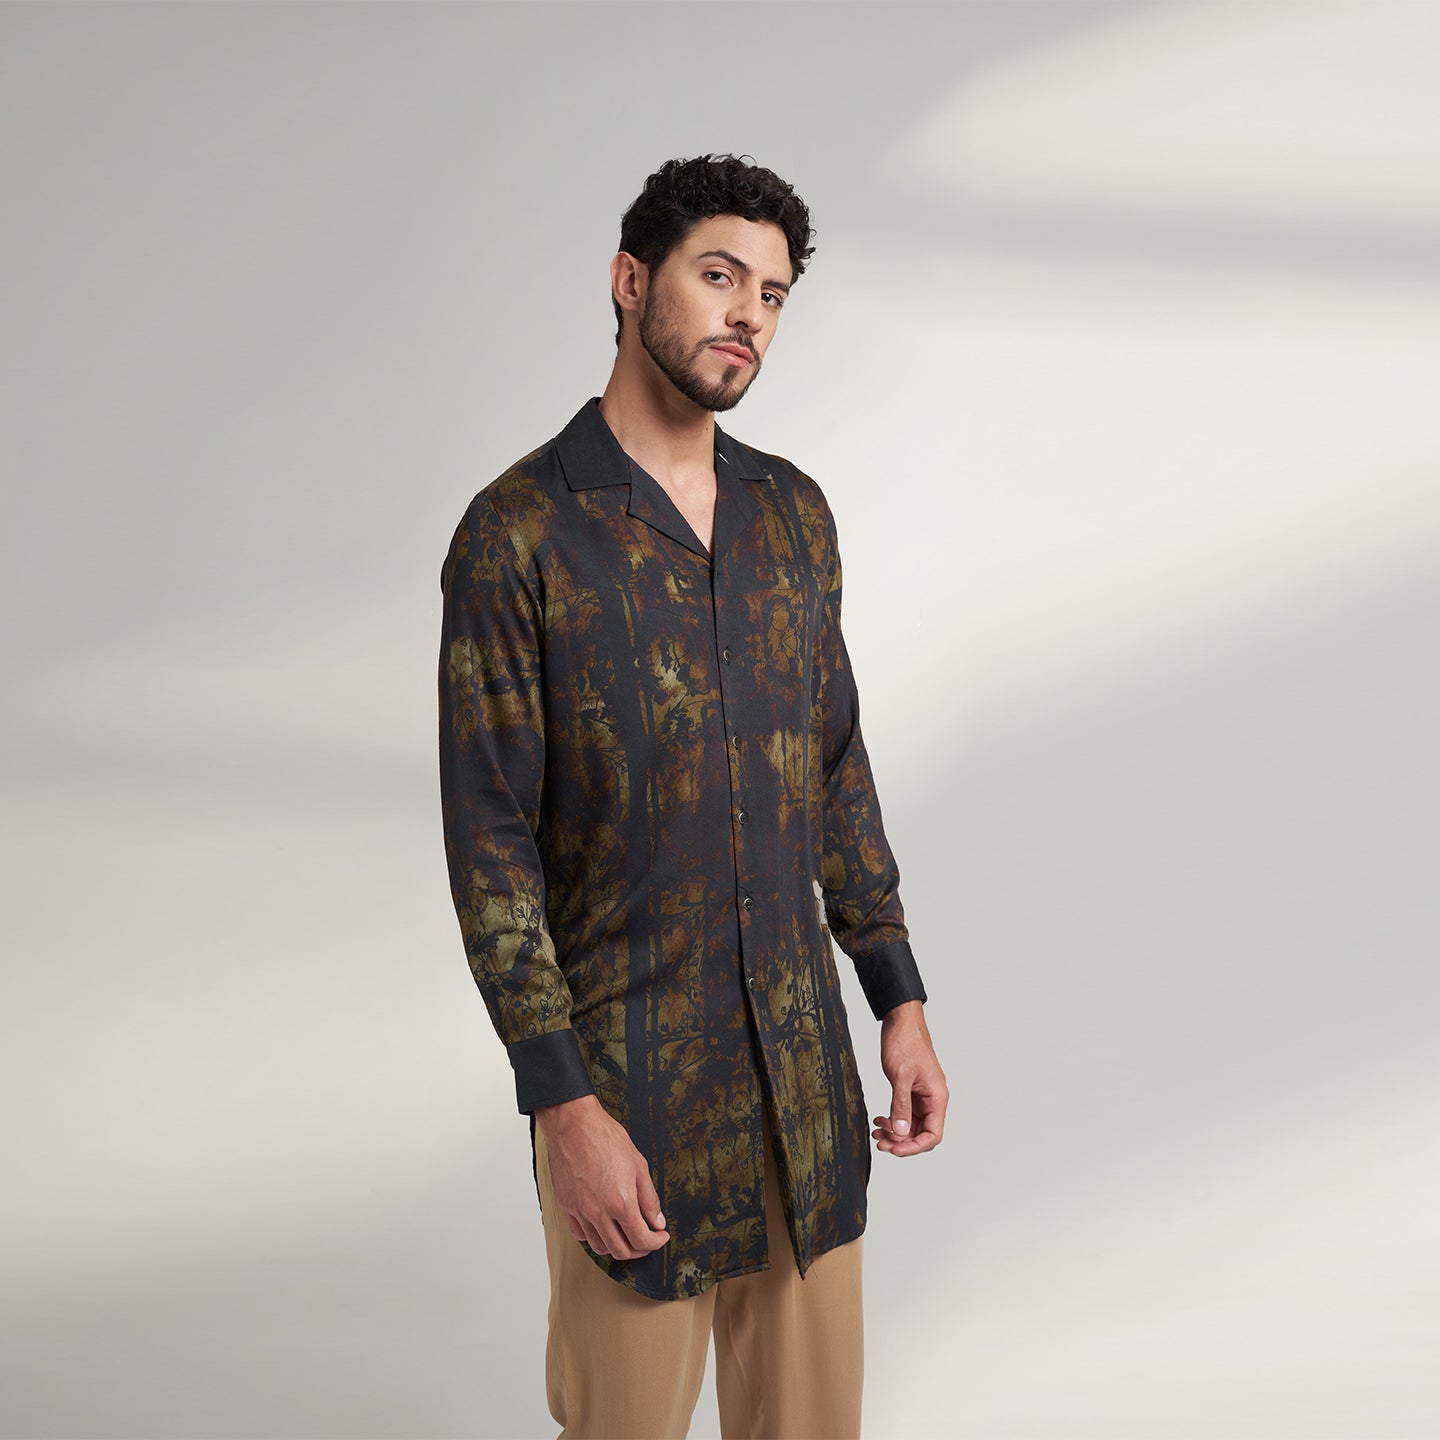 Medium size model wearing Organic Lotus fabric shirt printed with with non toxic GOTS certified inks with subtle black and beige print with cuban collars,the print is inspired from a antique forest painting.